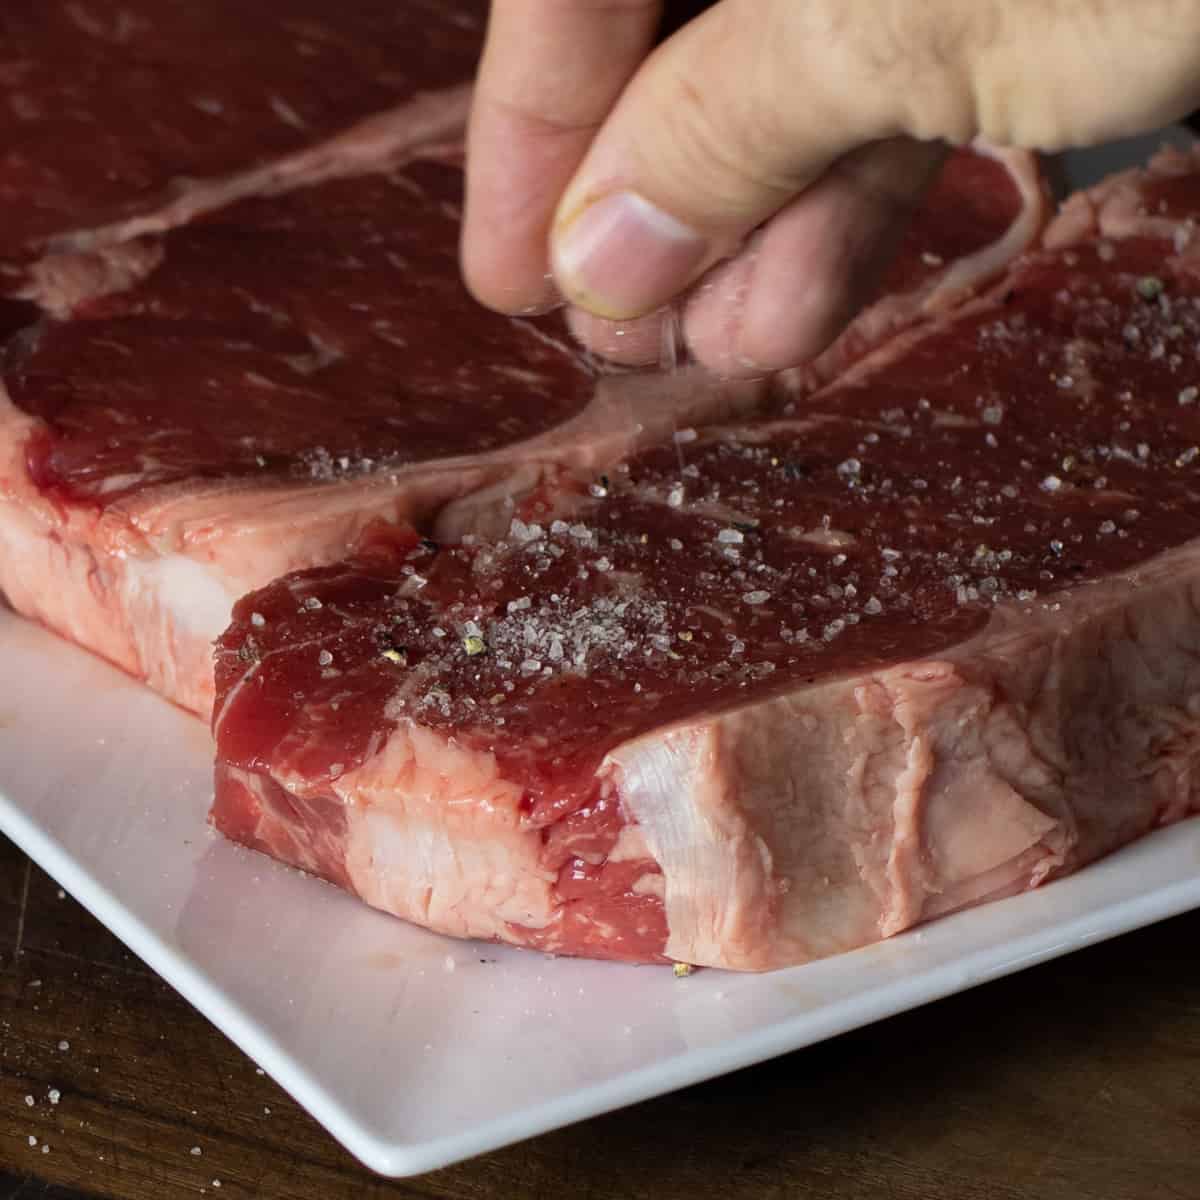 Salt and pepper being sprinkled on a raw steak.